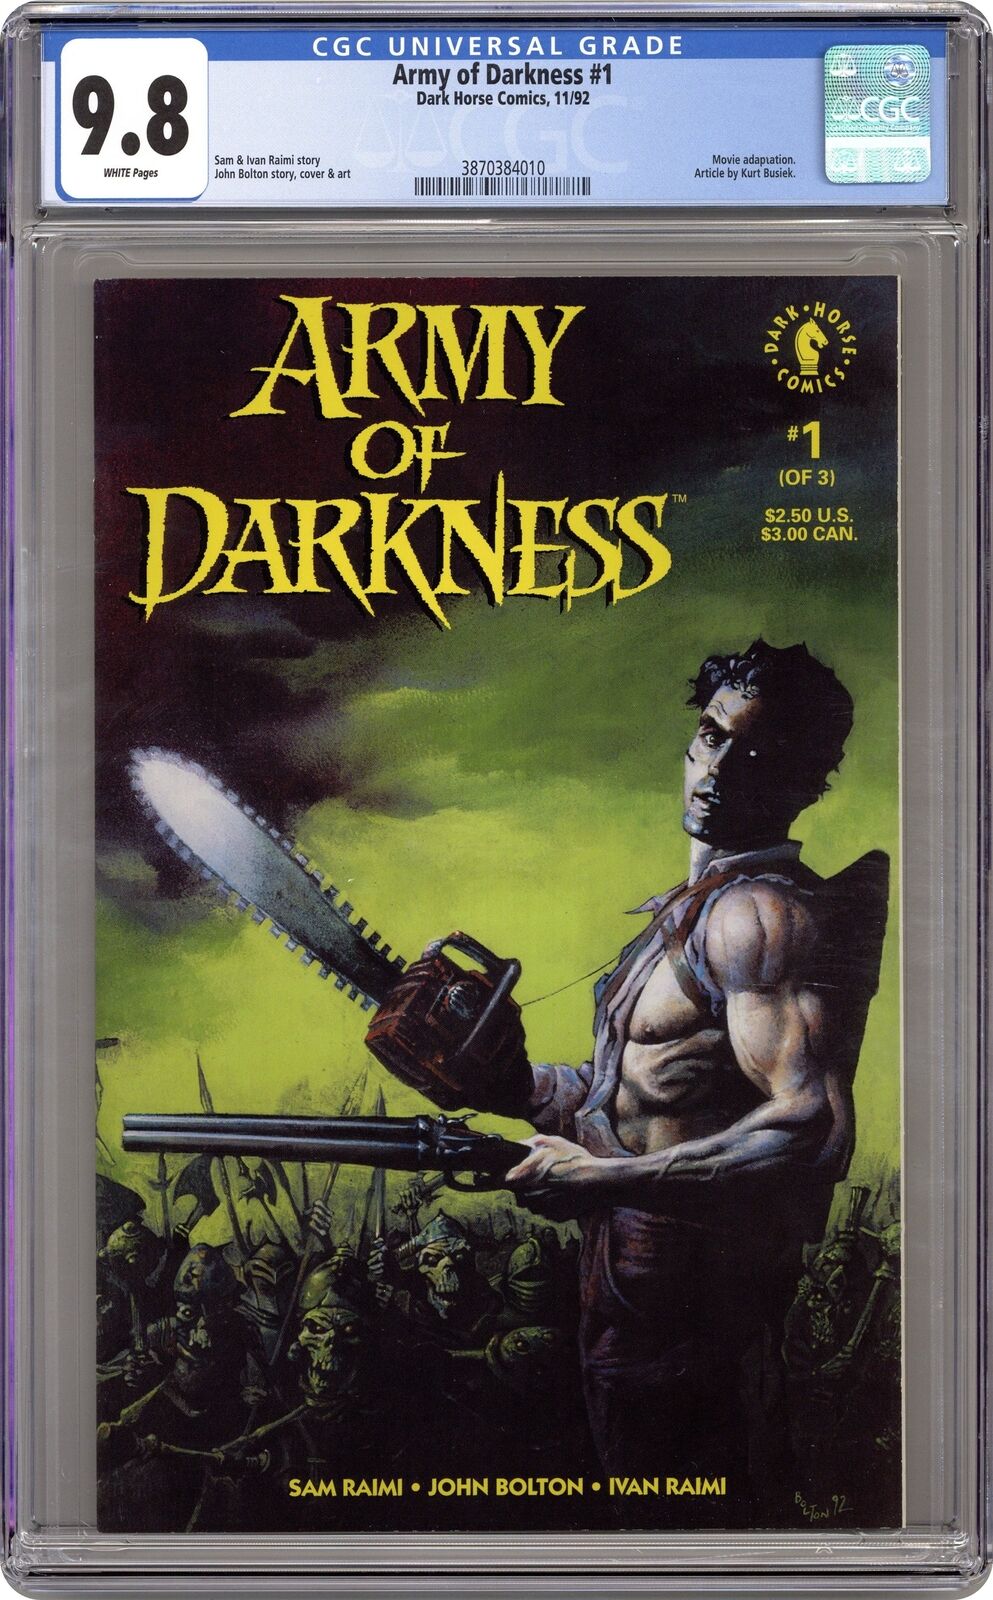 Army of Darkness #1 CGC 9.8 1992 3870384010